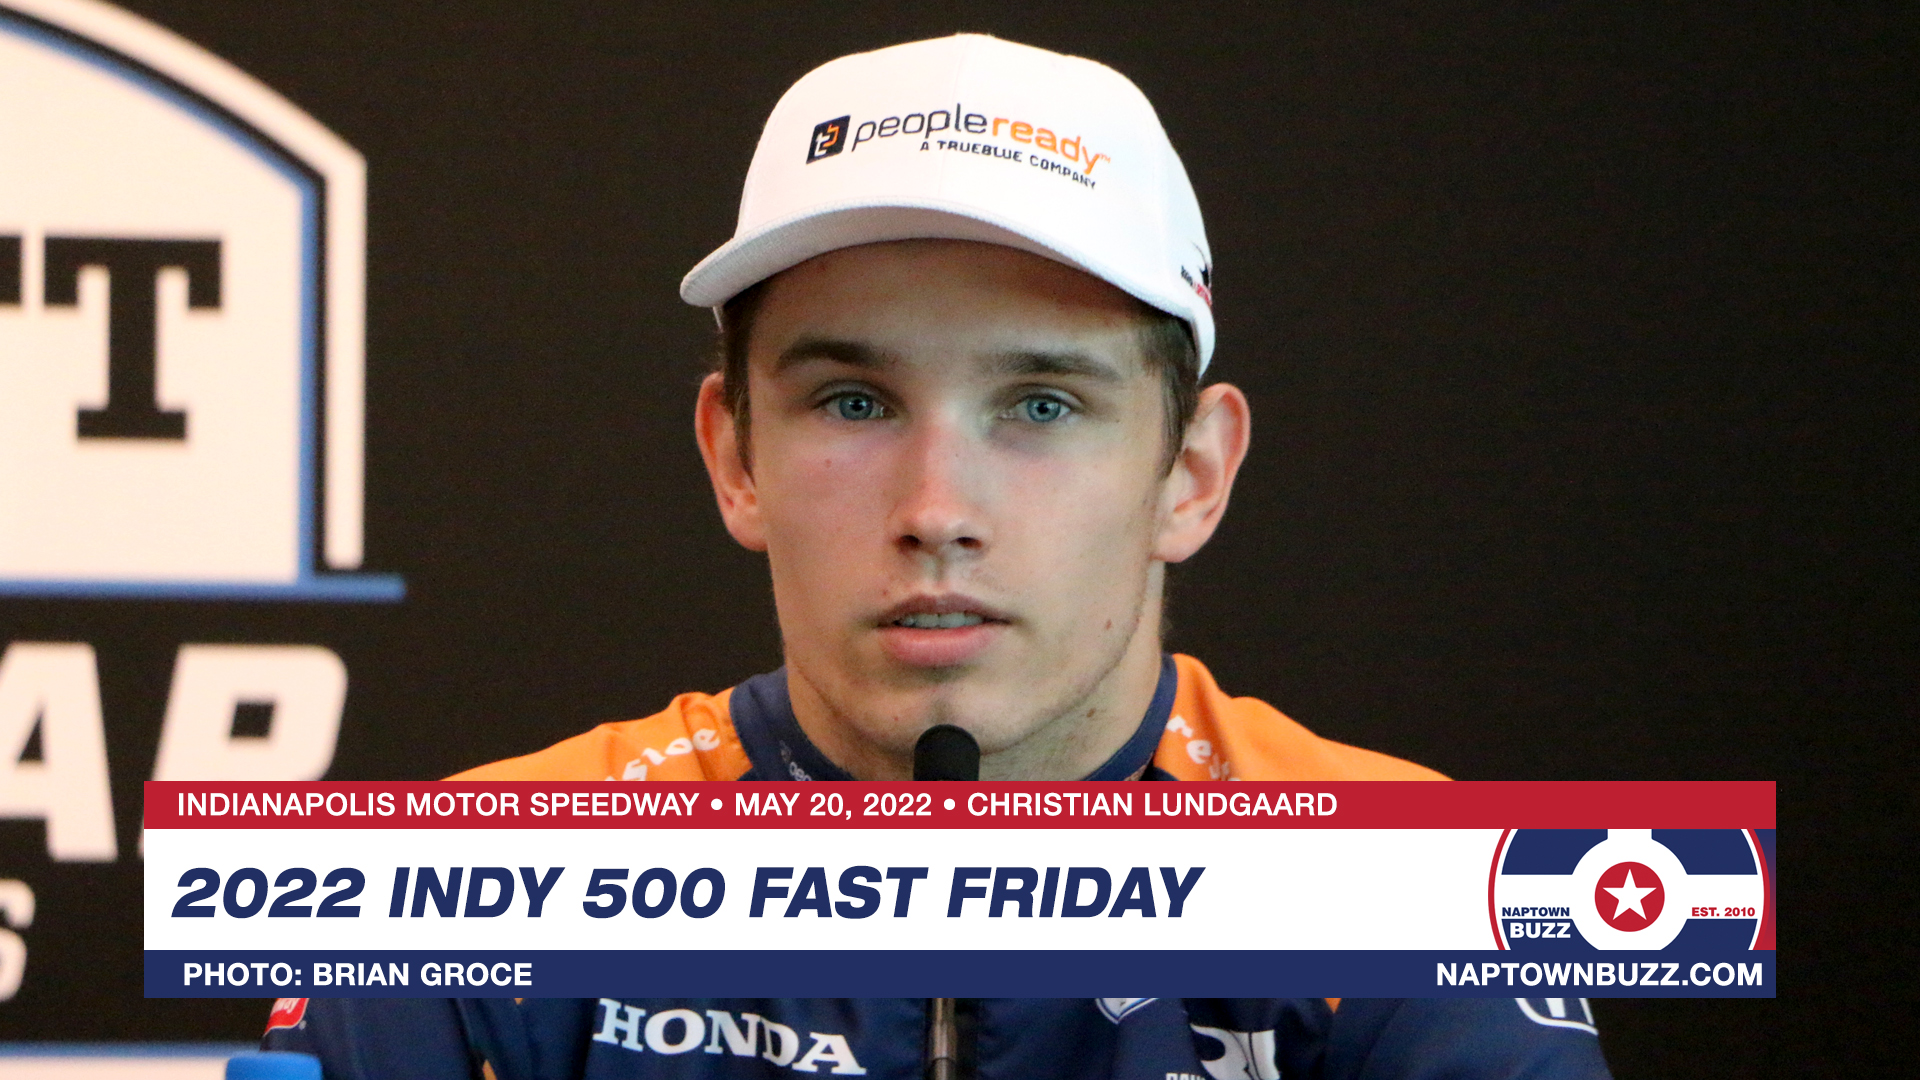 Christian Lundgaard on Indy 500 Fast Friday Practice at Indianapolis Motor Speedway on May 20, 2022